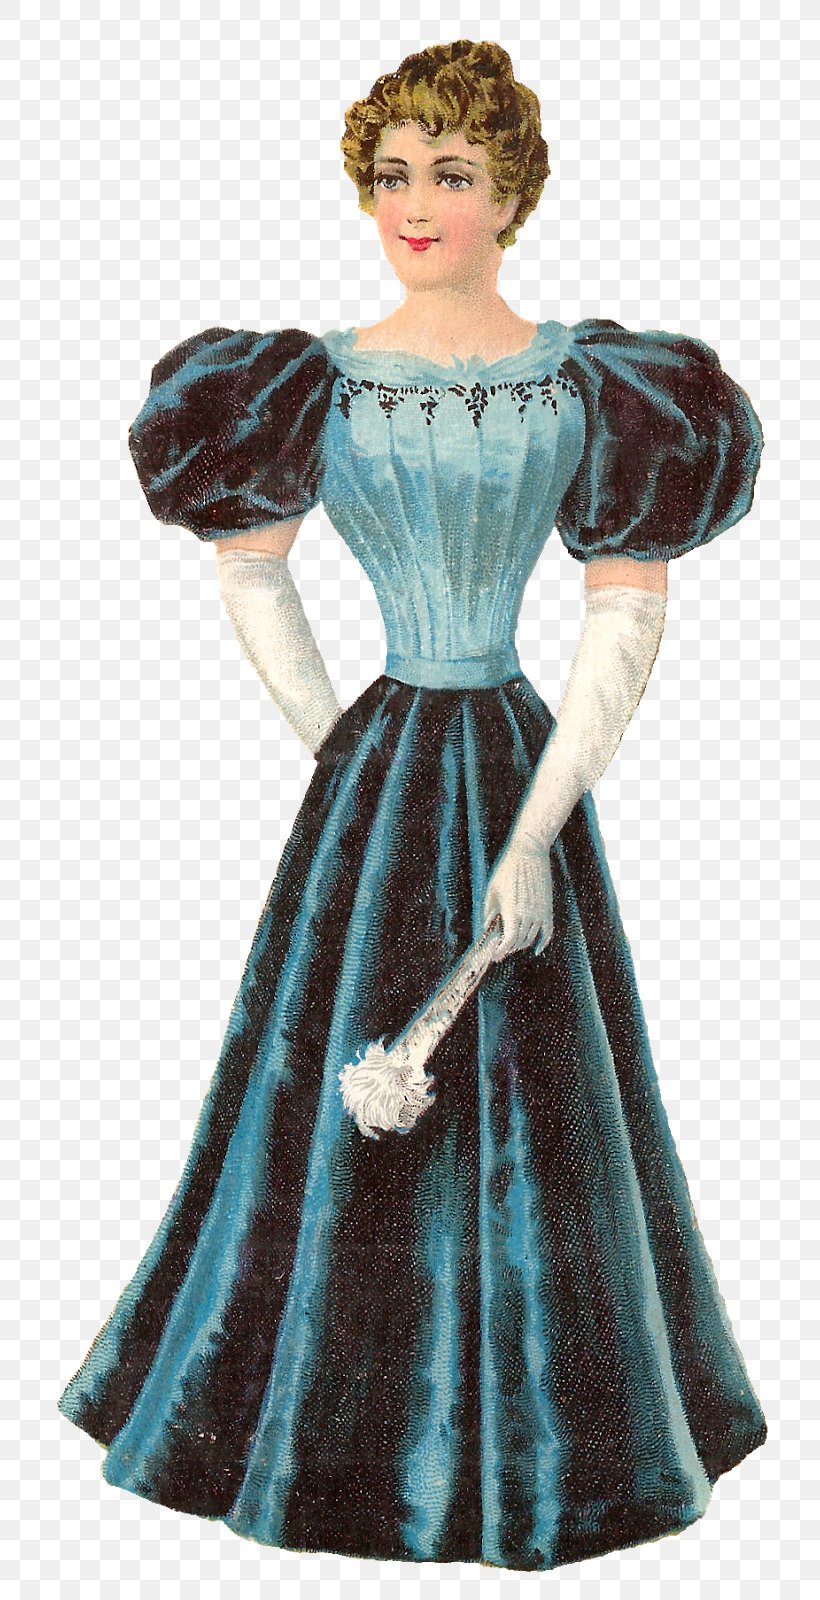 Victorian Era Dress Clothing Victorian Fashion Clip Art, PNG, 797x1600px, Victorian Era, Ball Gown, Clothing, Cocktail Dress, Costume Download Free